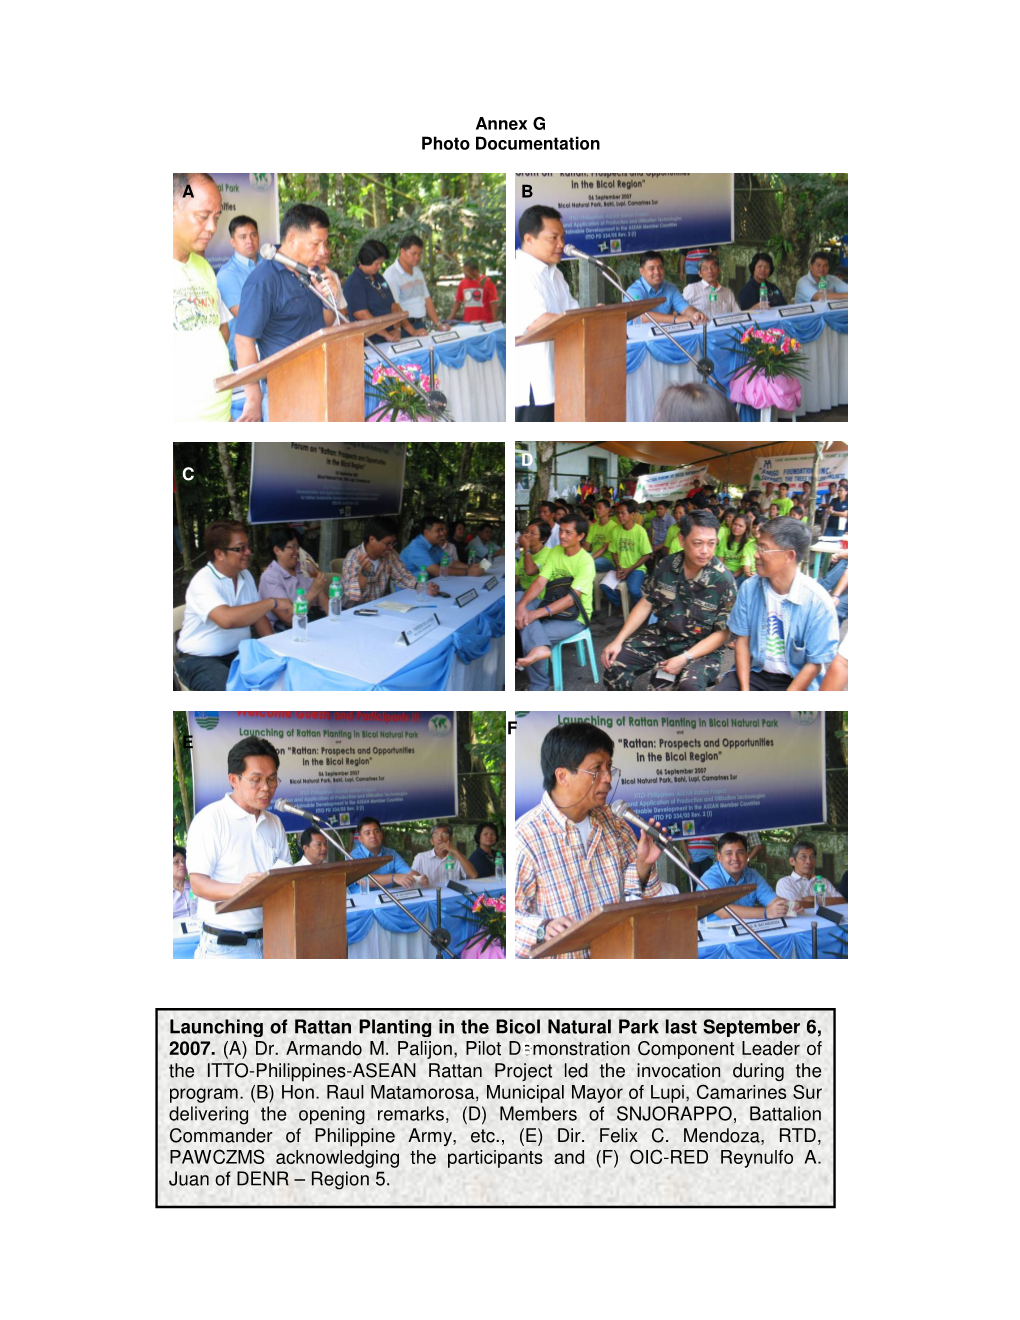 Launching of Rattan Planting in the Bicol Natural Park Last September 6, 2007